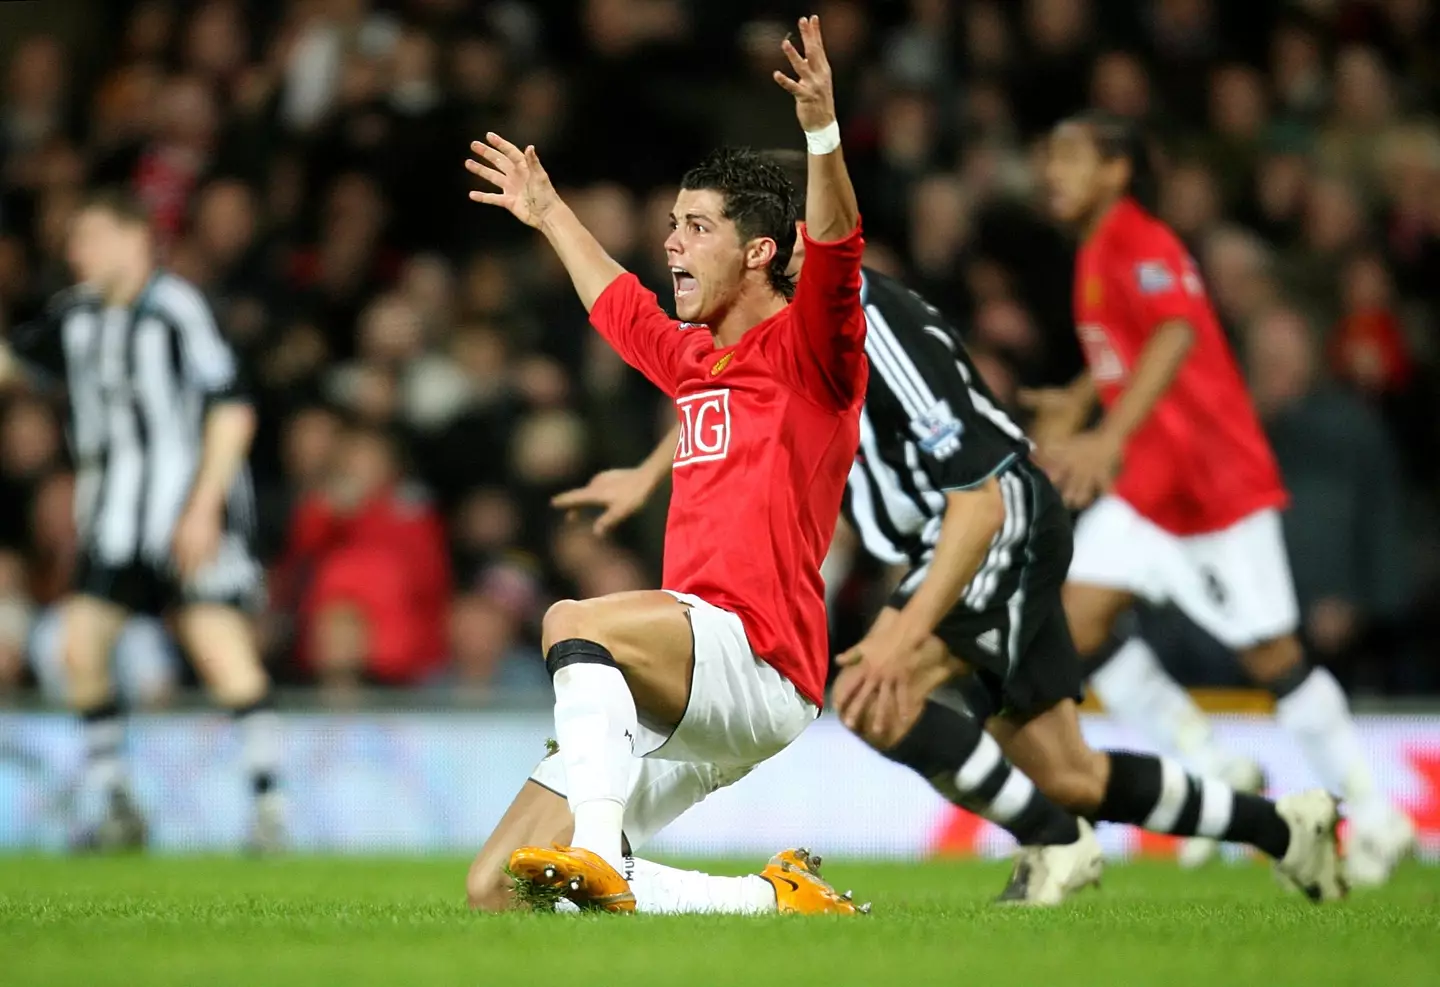 Cristiano Ronaldo is primed to make his Manchester United comeback this weekend against Newcastle